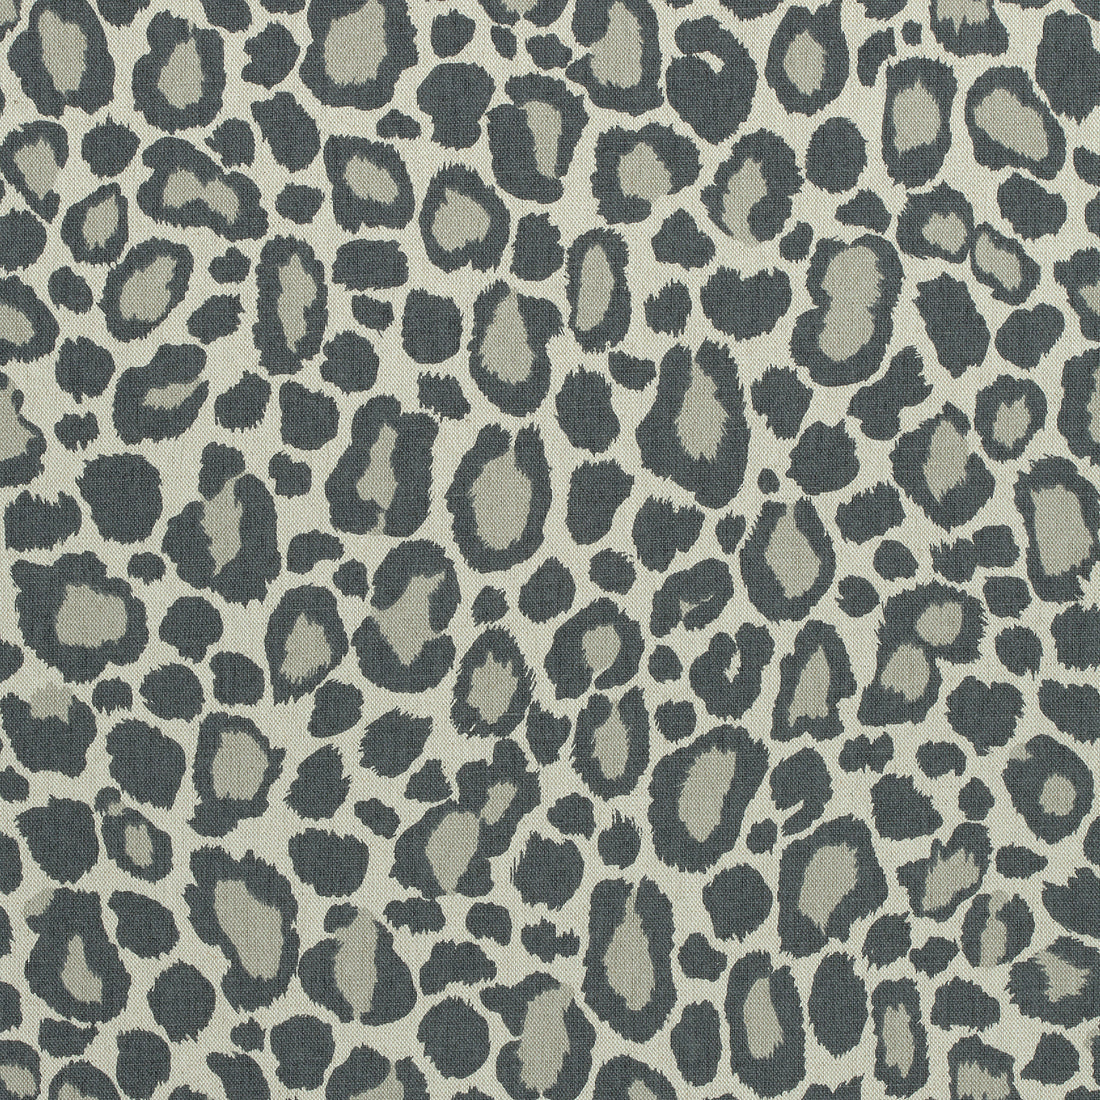 African Leopard fabric in grey color - pattern number AF72976 - by Anna French in the Manor collection